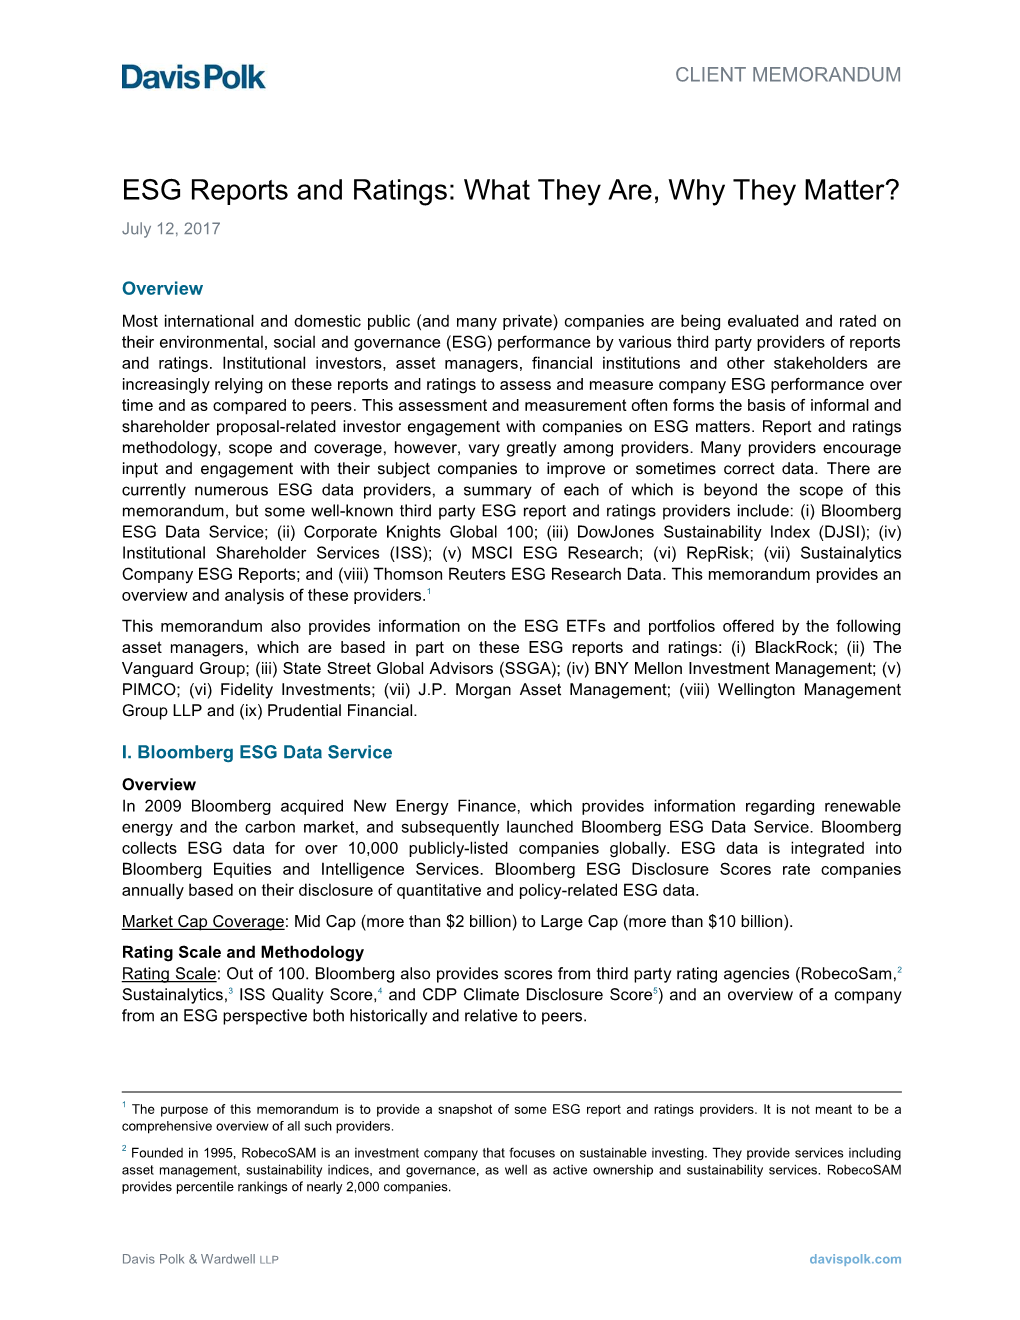 ESG Reports and Ratings: What They Are, Why They Matter? July 12, 2017